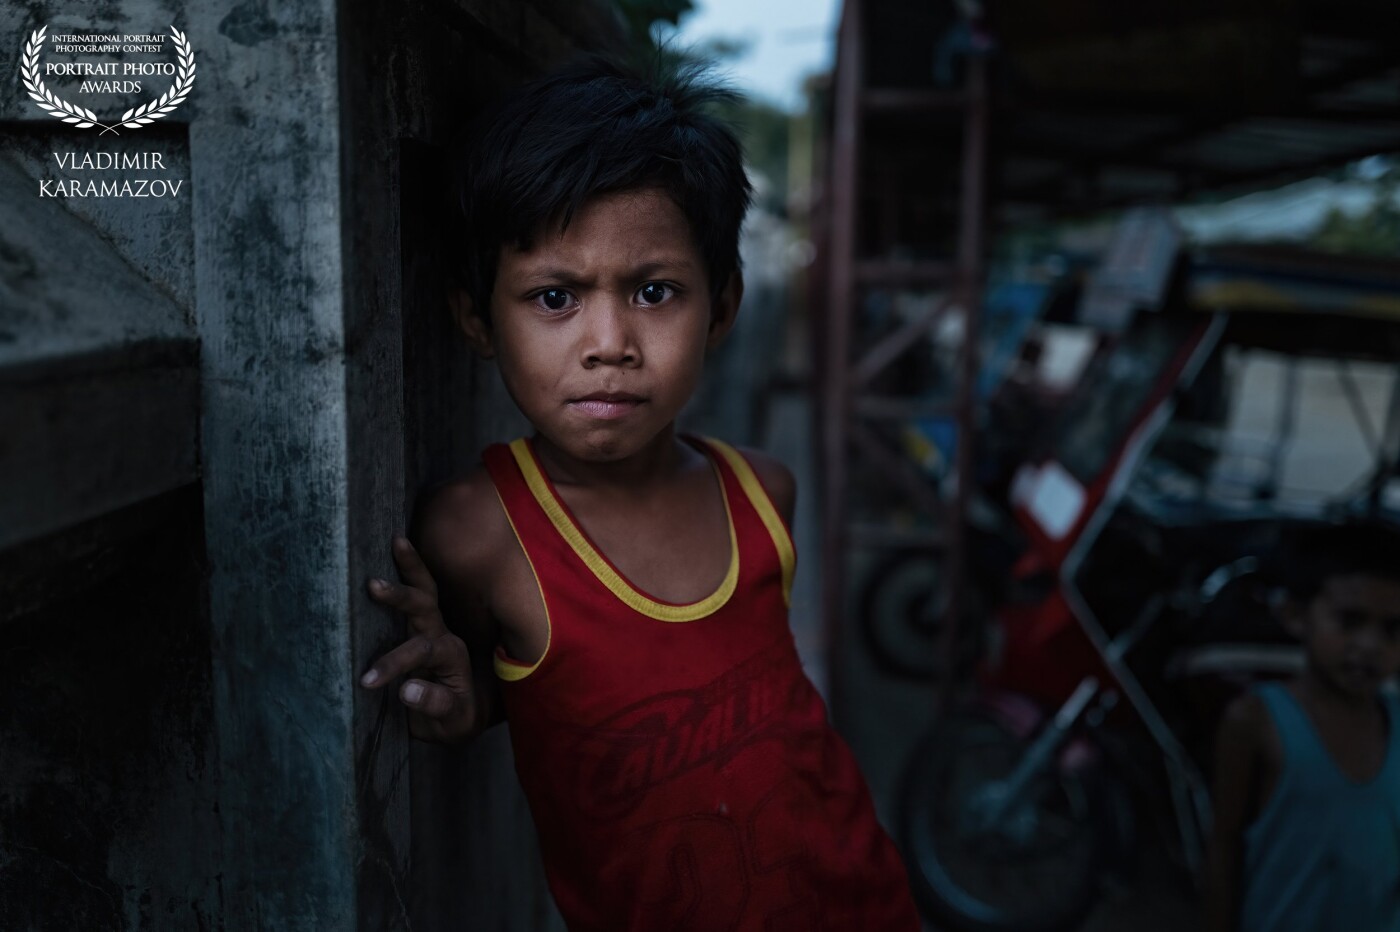 I met this child at a market in a village in the Philippines.  He really liked me taking pictures of him.  Among his many expressions, I chose the most angry.  Thus the child shows that he will become a strong person.